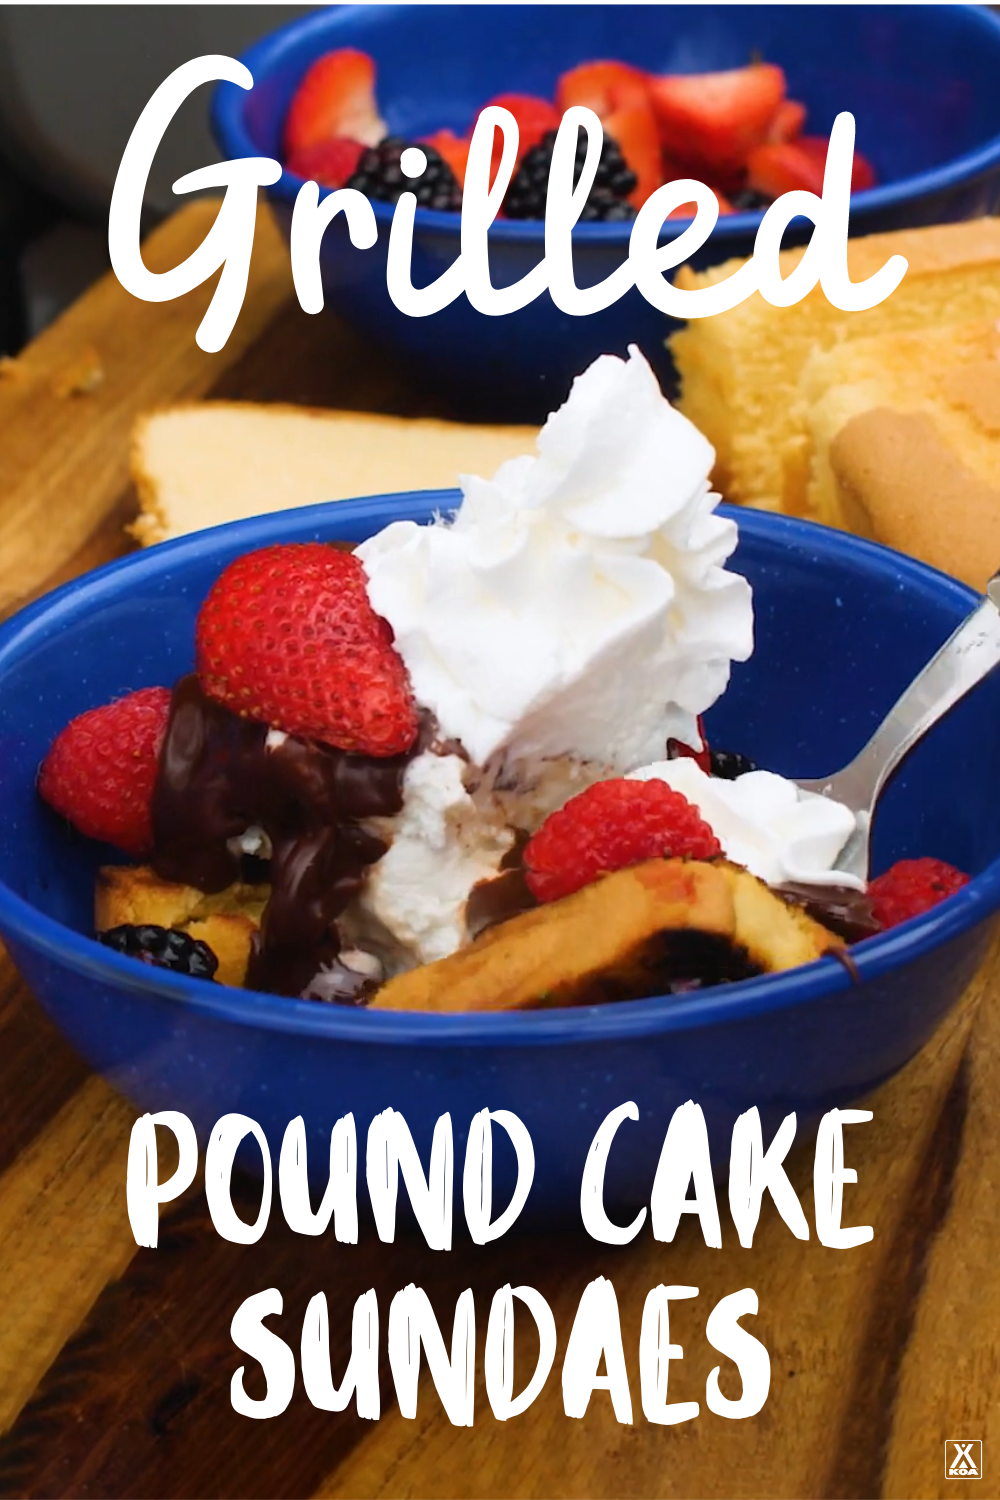 Get creative with your campfire or grill to take an everyday sundae to the next level. Our grilled pound cake sundae is sweet, warm and smoky. Try this fun camping dessert recipe!